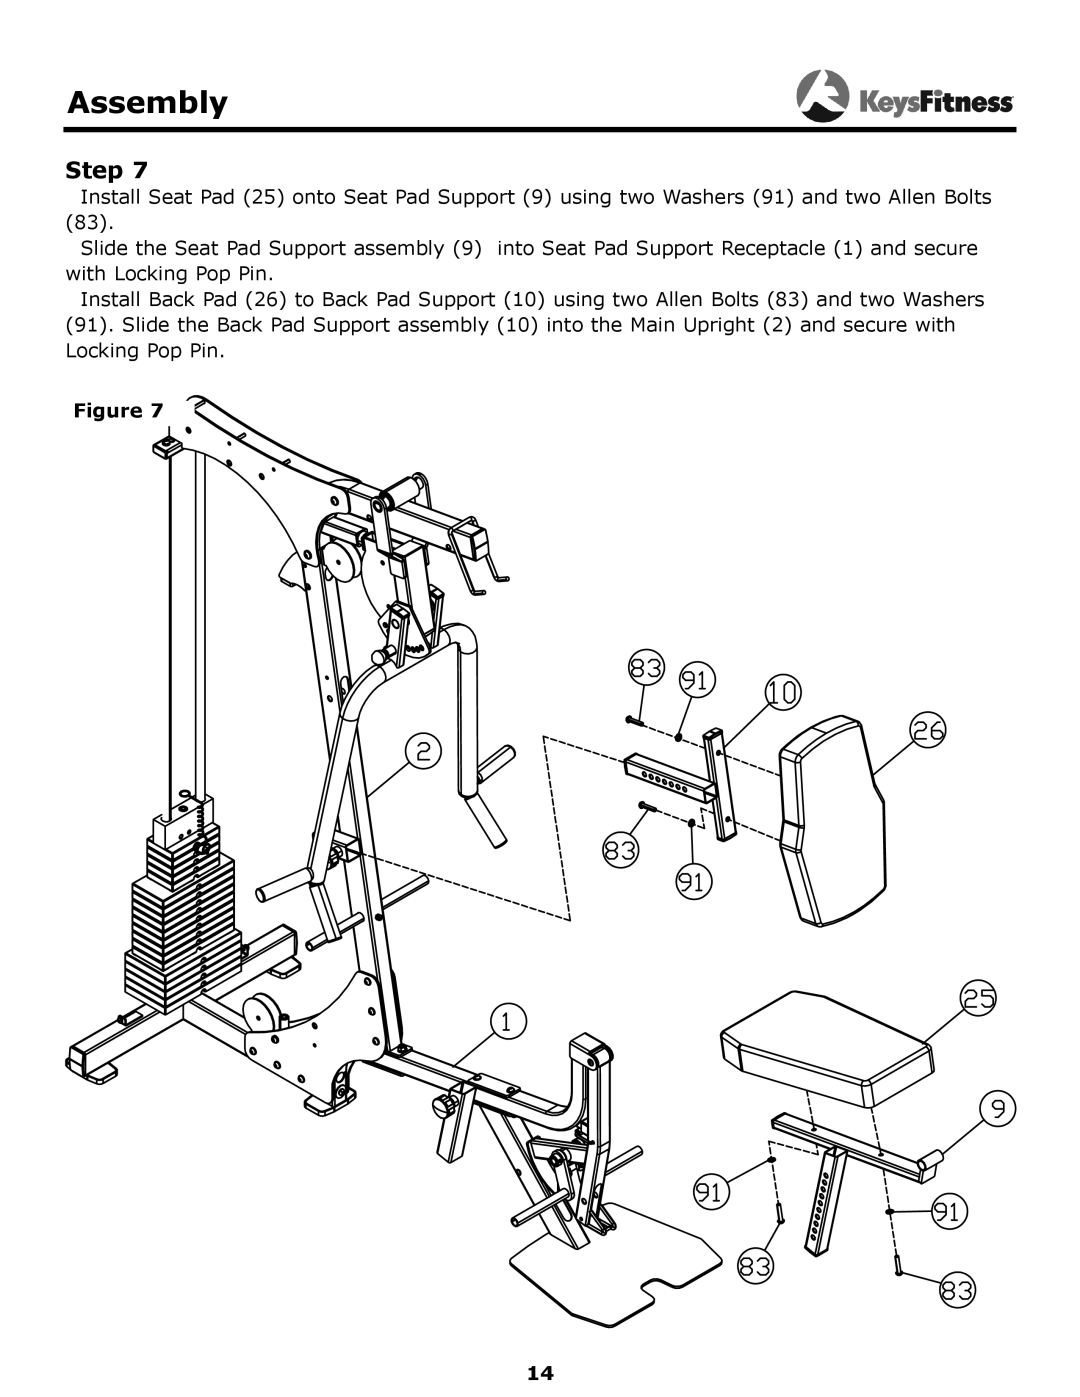 Keys Fitness KF-1560 Assembly, Step, Install Seat Pad 25 onto Seat Pad Support 9 using two Washers 91 and two Allen Bolts 